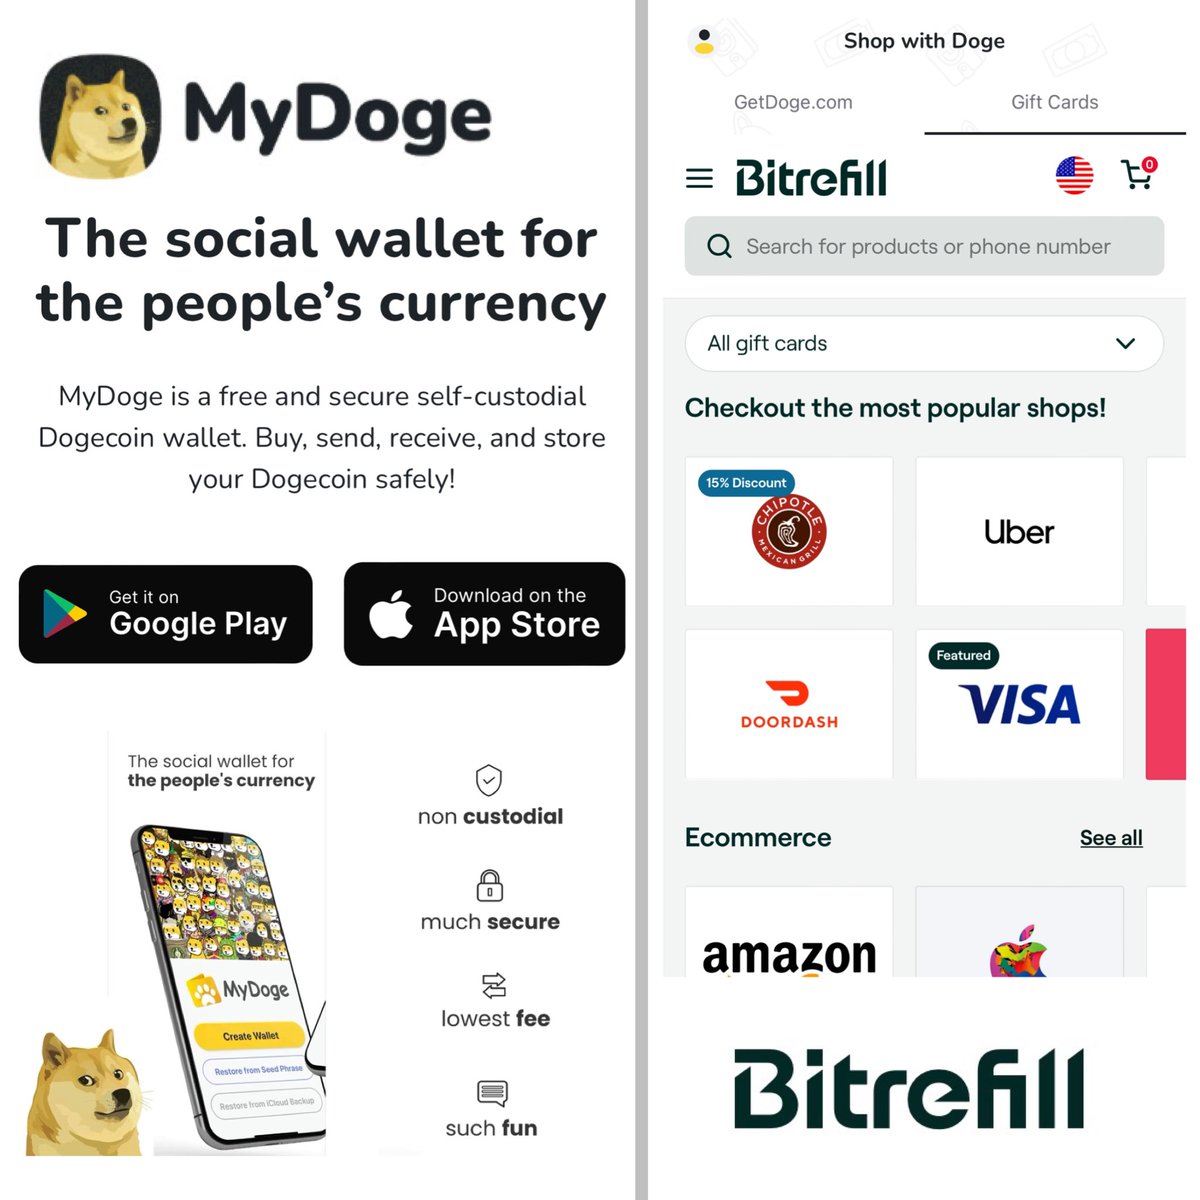 The MyDoge wallet has released a new update that contains Gift Cards from so many BIG retailers.  This means you can use your #Dogecoin at almost any retailer. You can even get a Visa Gift card, which is huge.  MyDoge and @bitrefill have partnered to make this possible  The